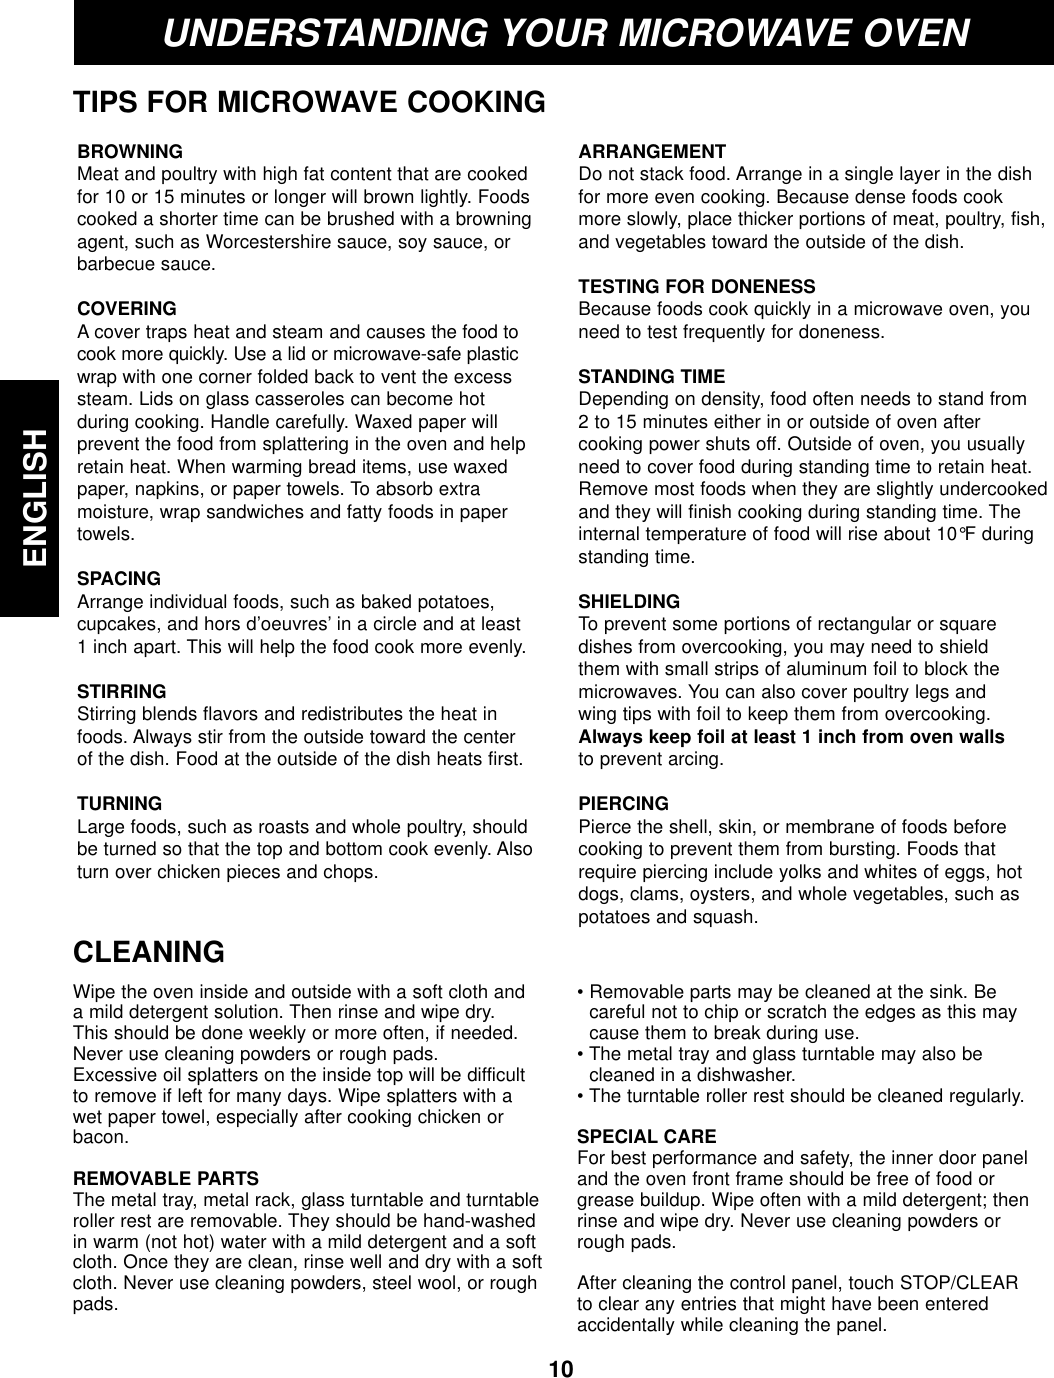 10ENGLISHUNDERSTANDING YOUR MICROWAVE OVENTIPS FOR MICROWAVE COOKINGBROWNINGMeat and poultry with high fat content that are cookedfor 10 or 15 minutes or longer will brown lightly. Foodscooked a shorter time can be brushed with a browningagent, such as Worcestershire sauce, soy sauce, orbarbecue sauce.COVERING A cover traps heat and steam and causes the food tocook more quickly. Use a lid or microwave-safe plasticwrap with one corner folded back to vent the excesssteam. Lids on glass casseroles can become hot during cooking. Handle carefully. Waxed paper will prevent the food from splattering in the oven and helpretain heat. When warming bread items, use waxedpaper, napkins, or paper towels. To absorb extra moisture, wrap sandwiches and fatty foods in papertowels.SPACINGArrange individual foods, such as baked potatoes, cupcakes, and hors d’oeuvres’ in a circle and at least 1 inch apart. This will help the food cook more evenly.STIRRING Stirring blends flavors and redistributes the heat infoods. Always stir from the outside toward the center of the dish. Food at the outside of the dish heats first.TURNINGLarge foods, such as roasts and whole poultry, shouldbe turned so that the top and bottom cook evenly. Alsoturn over chicken pieces and chops.ARRANGEMENTDo not stack food. Arrange in a single layer in the dishfor more even cooking. Because dense foods cookmore slowly, place thicker portions of meat, poultry, fish,and vegetables toward the outside of the dish.TESTING FOR DONENESS Because foods cook quickly in a microwave oven, youneed to test frequently for doneness.STANDING TIME Depending on density, food often needs to stand from 2 to 15 minutes either in or outside of oven aftercooking power shuts off. Outside of oven, you usuallyneed to cover food during standing time to retain heat.Remove most foods when they are slightly undercookedand they will finish cooking during standing time. Theinternal temperature of food will rise about 10°F duringstanding time.SHIELDING To prevent some portions of rectangular or squaredishes from overcooking, you may need to shield them with small strips of aluminum foil to block themicrowaves. You can also cover poultry legs and wing tips with foil to keep them from overcooking.Always keep foil at least 1 inch from oven wallsto prevent arcing.PIERCING Pierce the shell, skin, or membrane of foods beforecooking to prevent them from bursting. Foods thatrequire piercing include yolks and whites of eggs, hotdogs, clams, oysters, and whole vegetables, such aspotatoes and squash.CLEANINGWipe the oven inside and outside with a soft cloth anda mild detergent solution. Then rinse and wipe dry.This should be done weekly or more often, if needed.Never use cleaning powders or rough pads.Excessive oil splatters on the inside top will be difficultto remove if left for many days. Wipe splatters with awet paper towel, especially after cooking chicken orbacon.REMOVABLE PARTSThe metal tray, metal rack, glass turntable and turntableroller rest are removable. They should be hand-washedin warm (not hot) water with a mild detergent and a softcloth. Once they are clean, rinse well and dry with a softcloth. Never use cleaning powders, steel wool, or roughpads.• Removable parts may be cleaned at the sink. Becareful not to chip or scratch the edges as this maycause them to break during use.• The metal tray and glass turntable may also becleaned in a dishwasher.• The turntable roller rest should be cleaned regularly.SPECIAL CAREFor best performance and safety, the inner door paneland the oven front frame should be free of food orgrease buildup. Wipe often with a mild detergent; thenrinse and wipe dry. Never use cleaning powders orrough pads.After cleaning the control panel, touch STOP/CLEARto clear any entries that might have been enteredaccidentally while cleaning the panel.